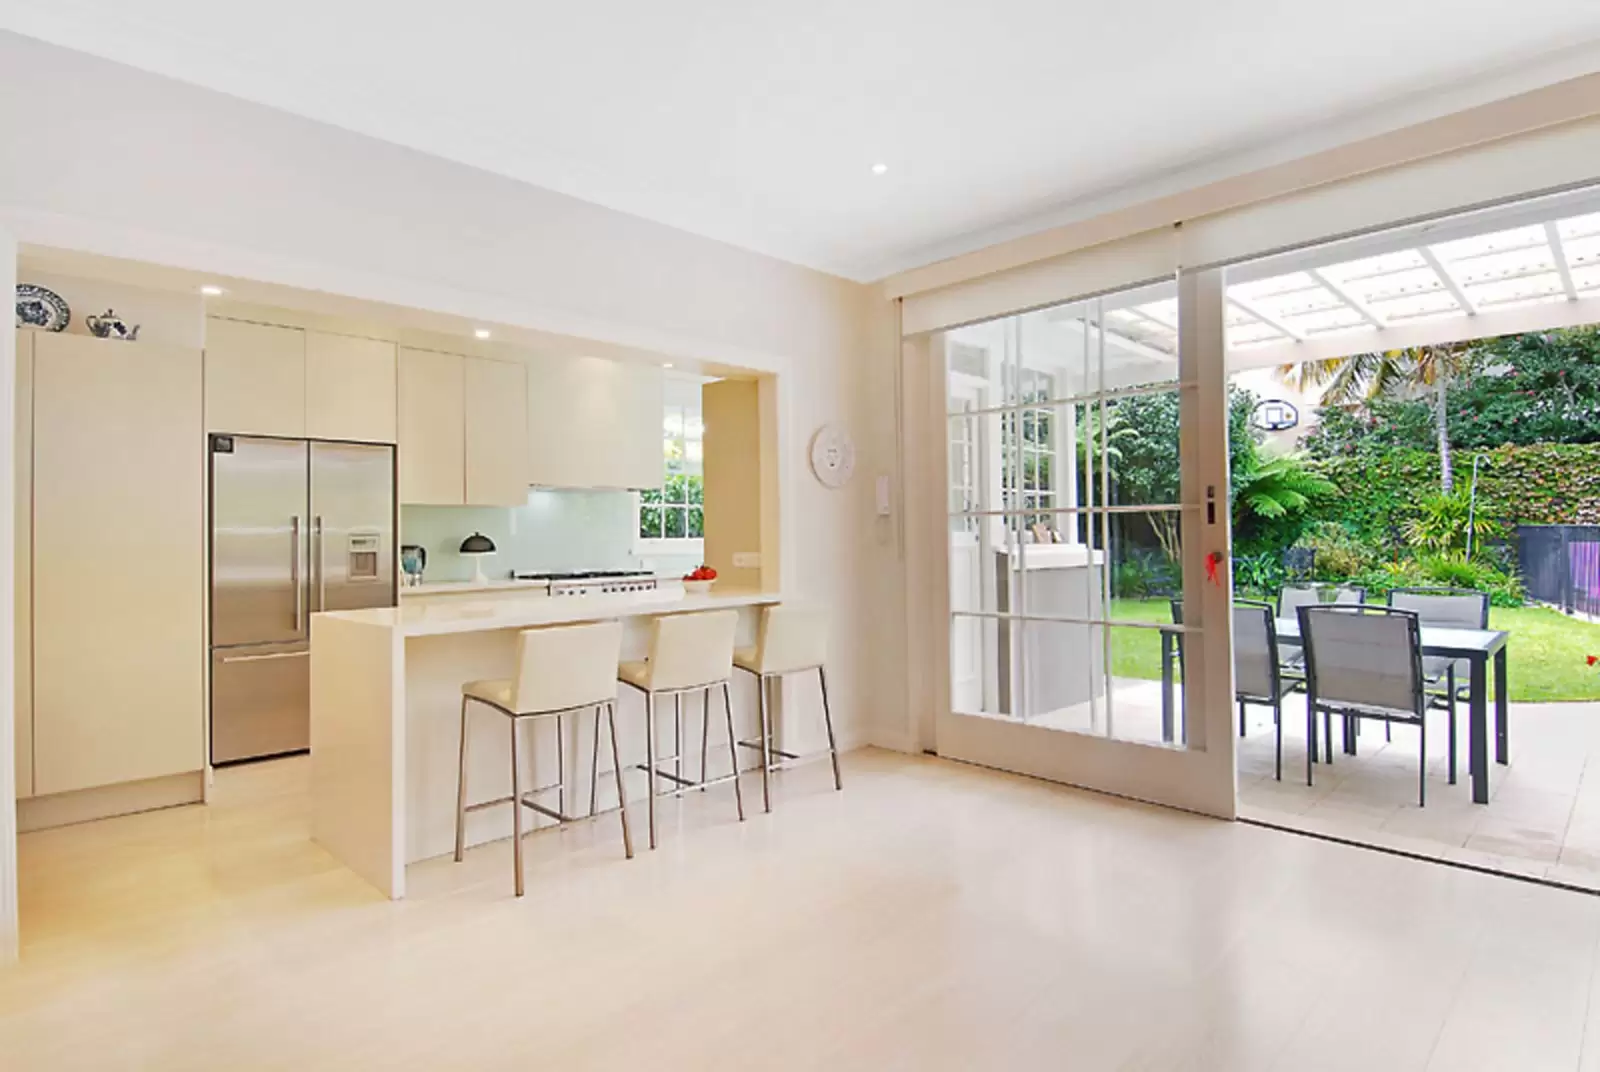 55 Olola Avenue, Vaucluse Leased by Sydney Sotheby's International Realty - image 4